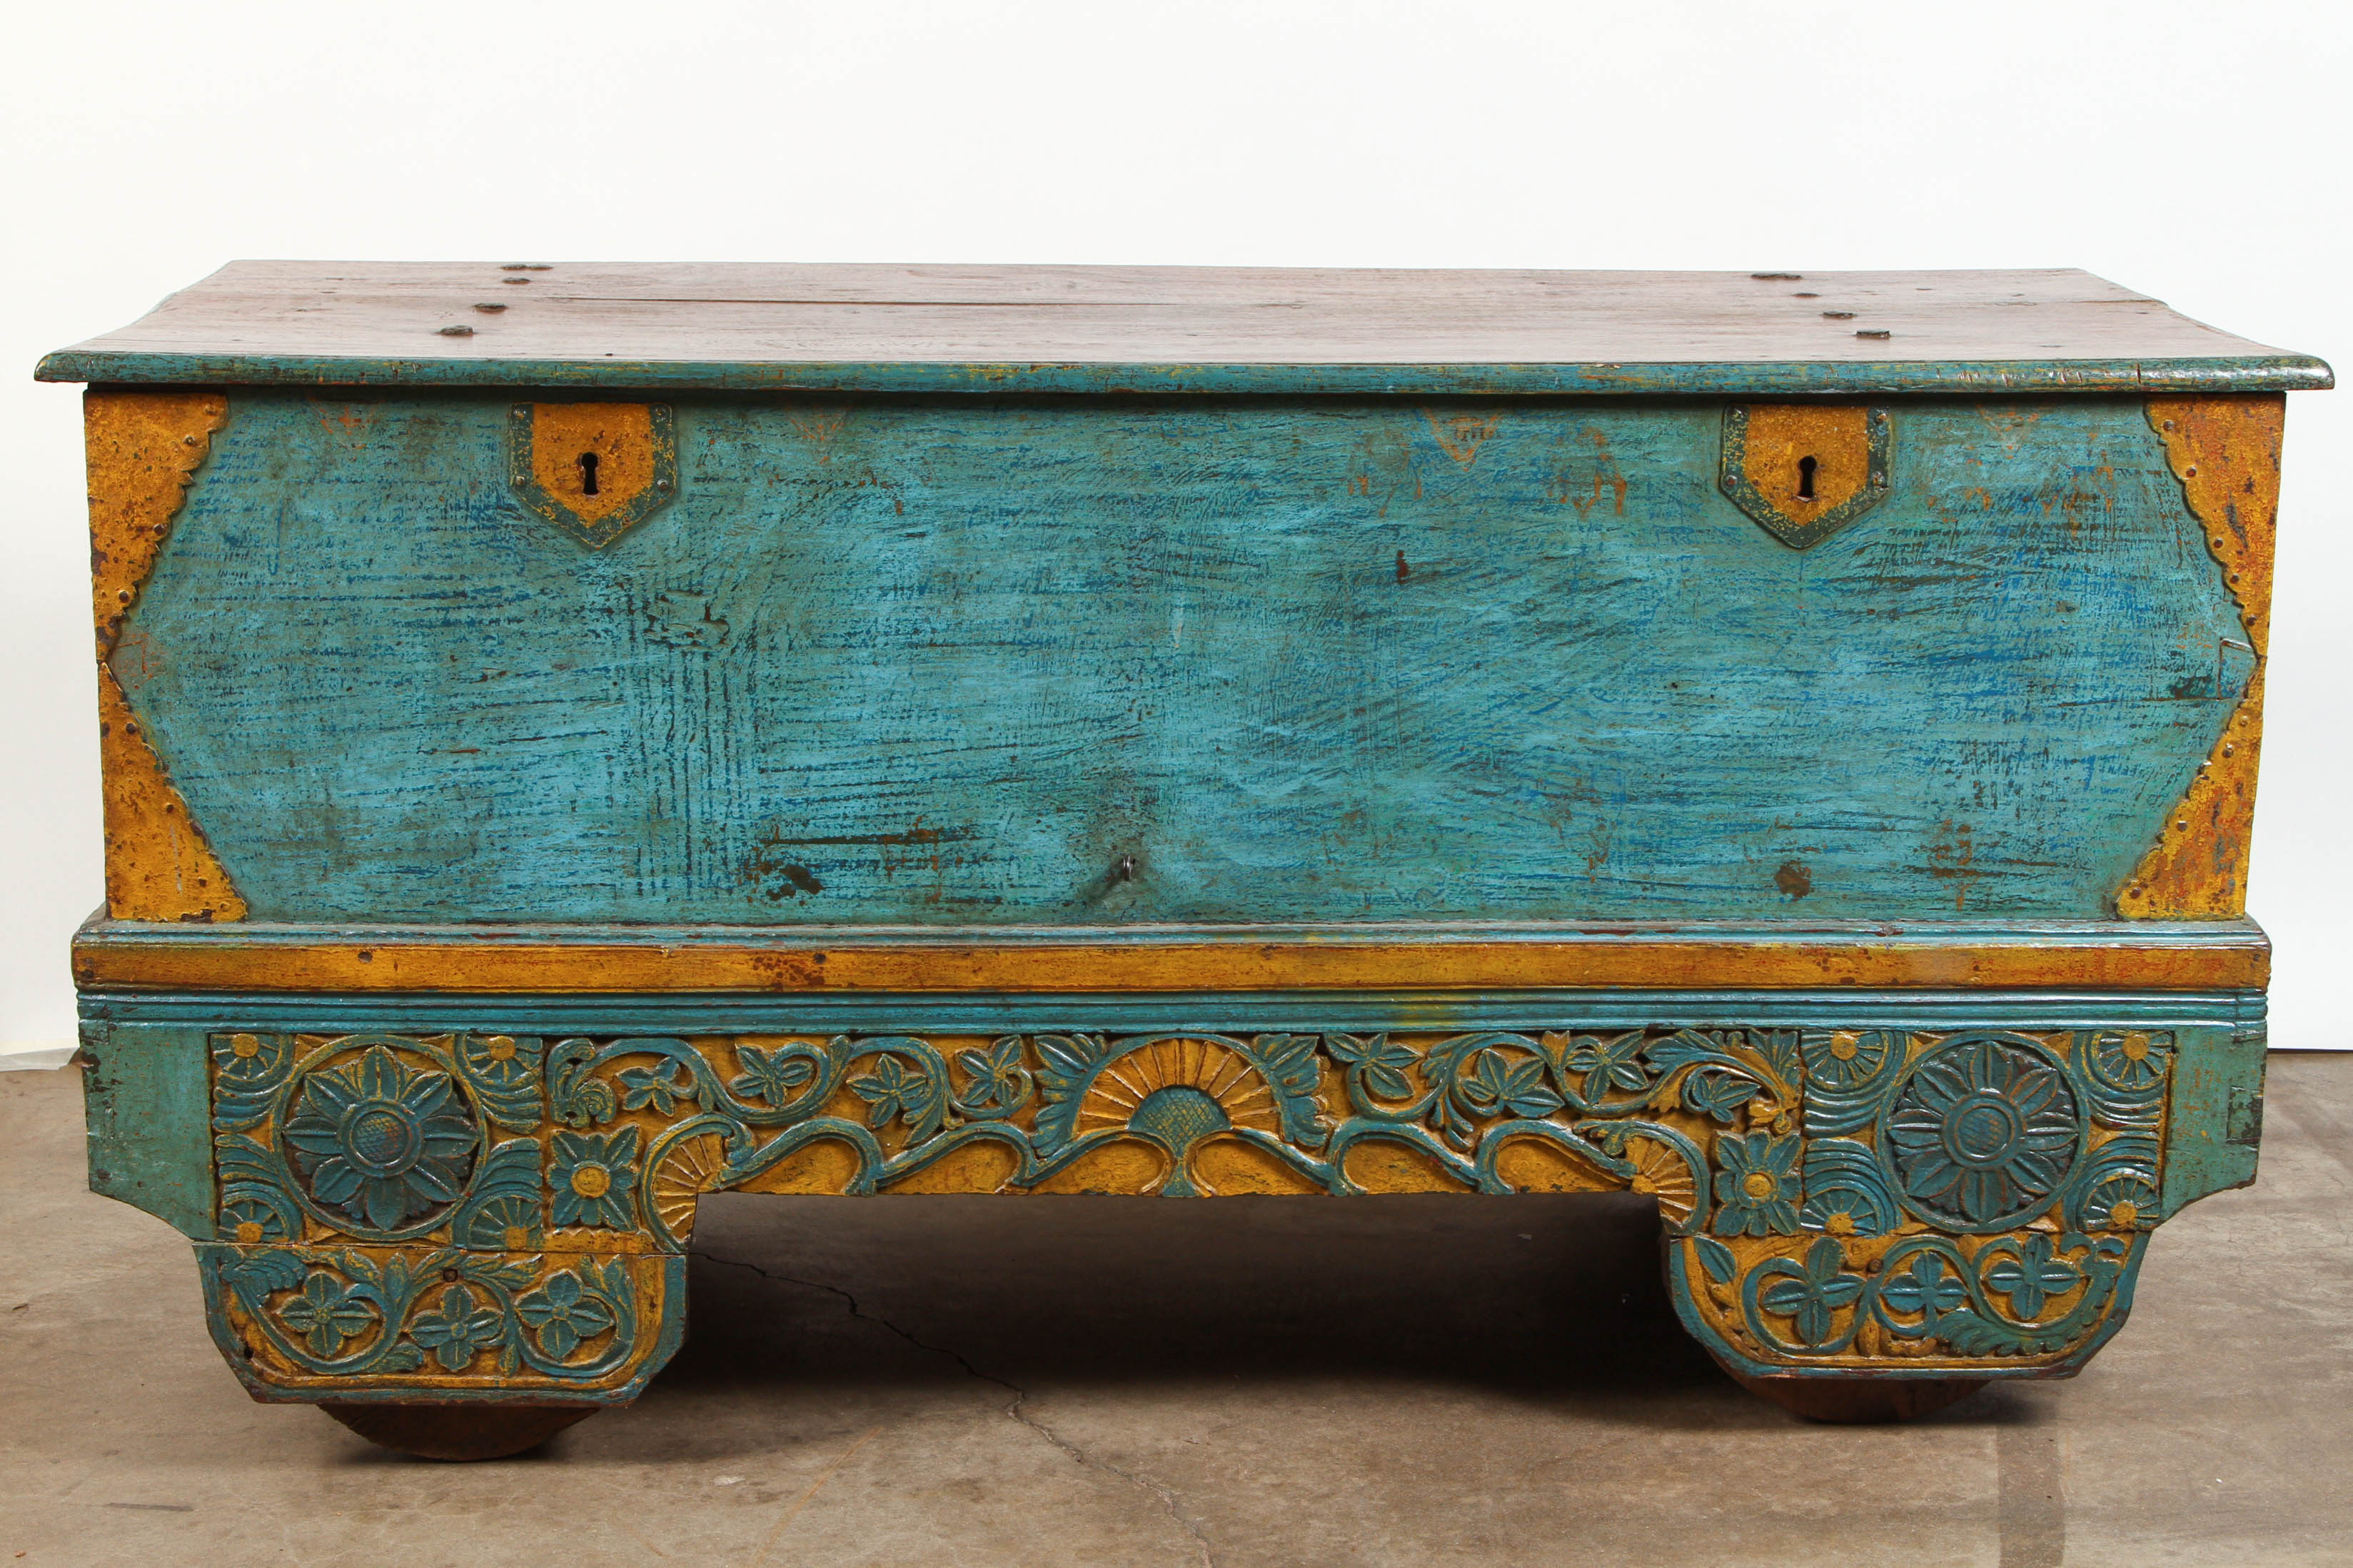 Dutch Colonial Indonesian Painted Trunk on Wheels